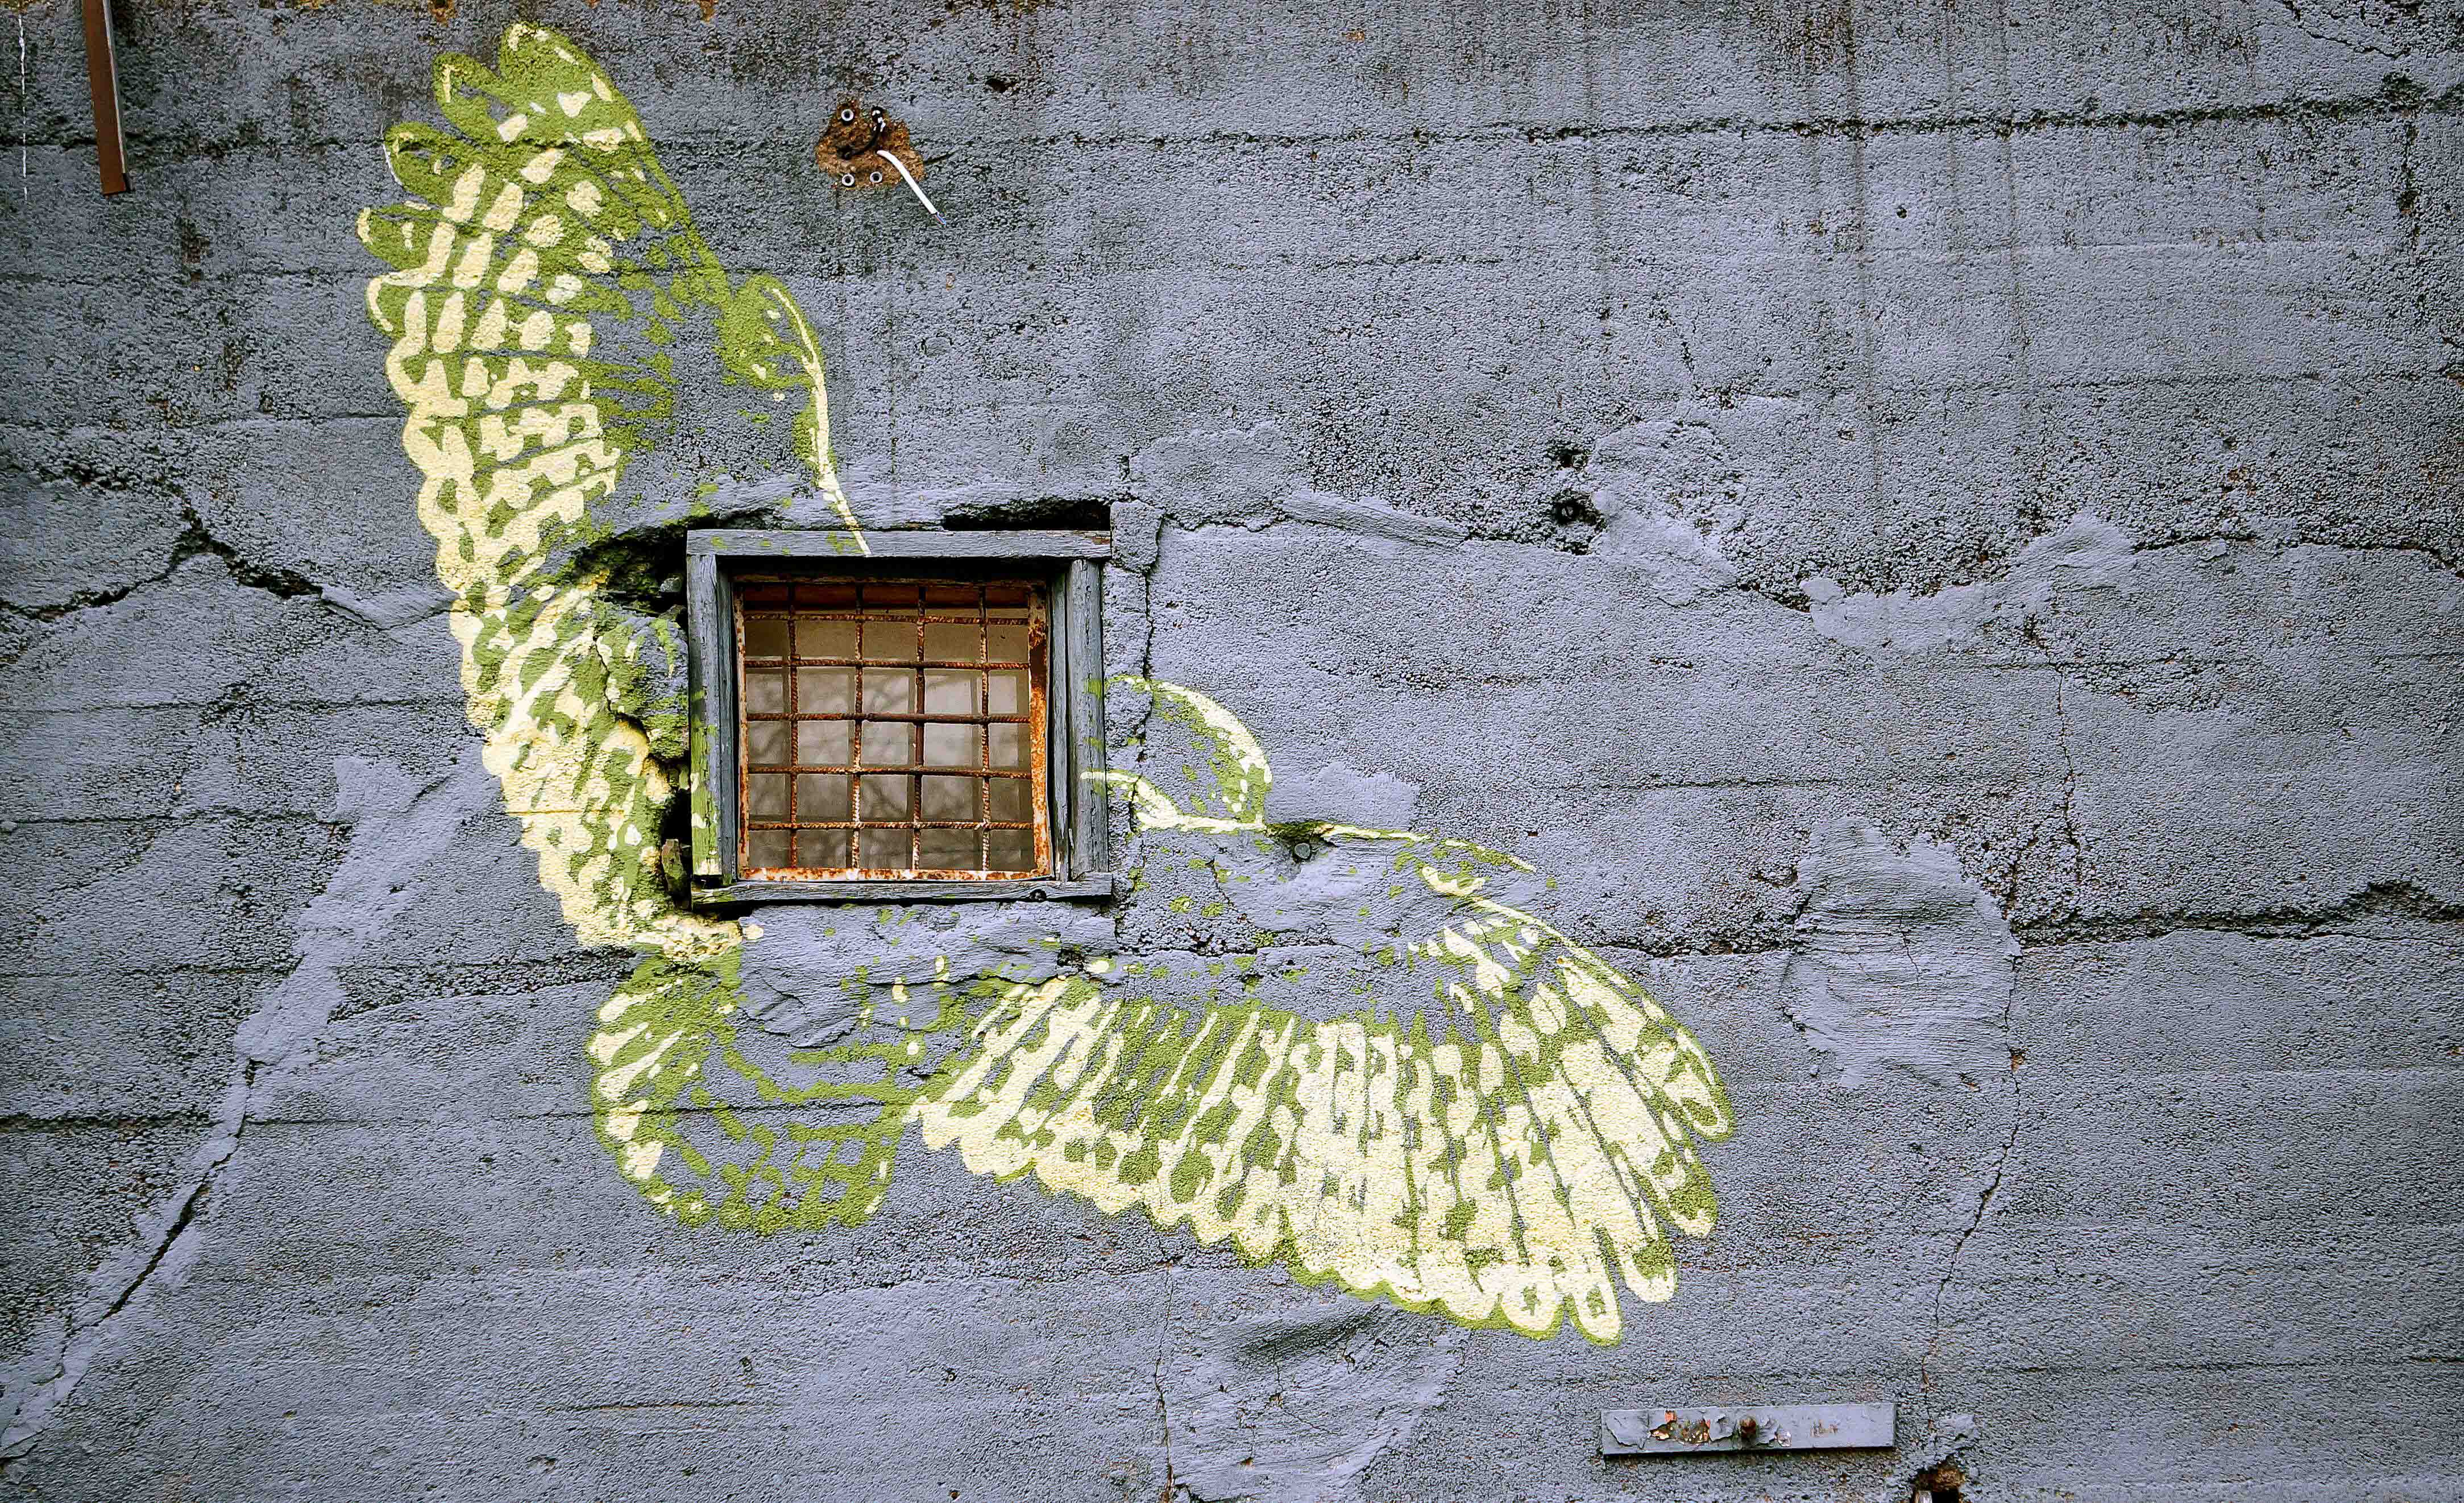 A painted yellow and gold bird with its wings spread on a gray concrete wall with a rusty barred window